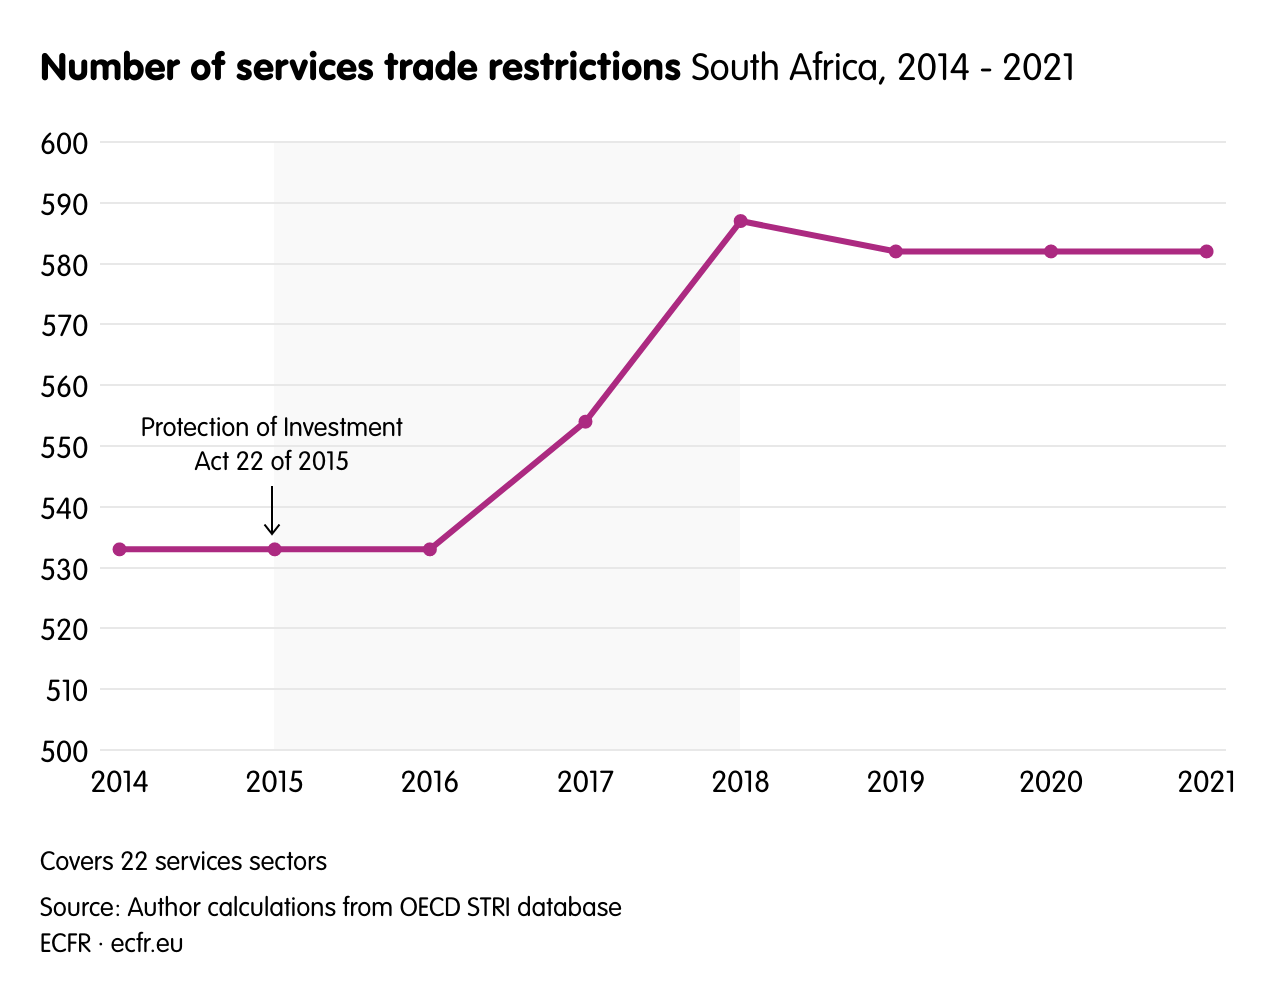 Number of services trade restrictions 